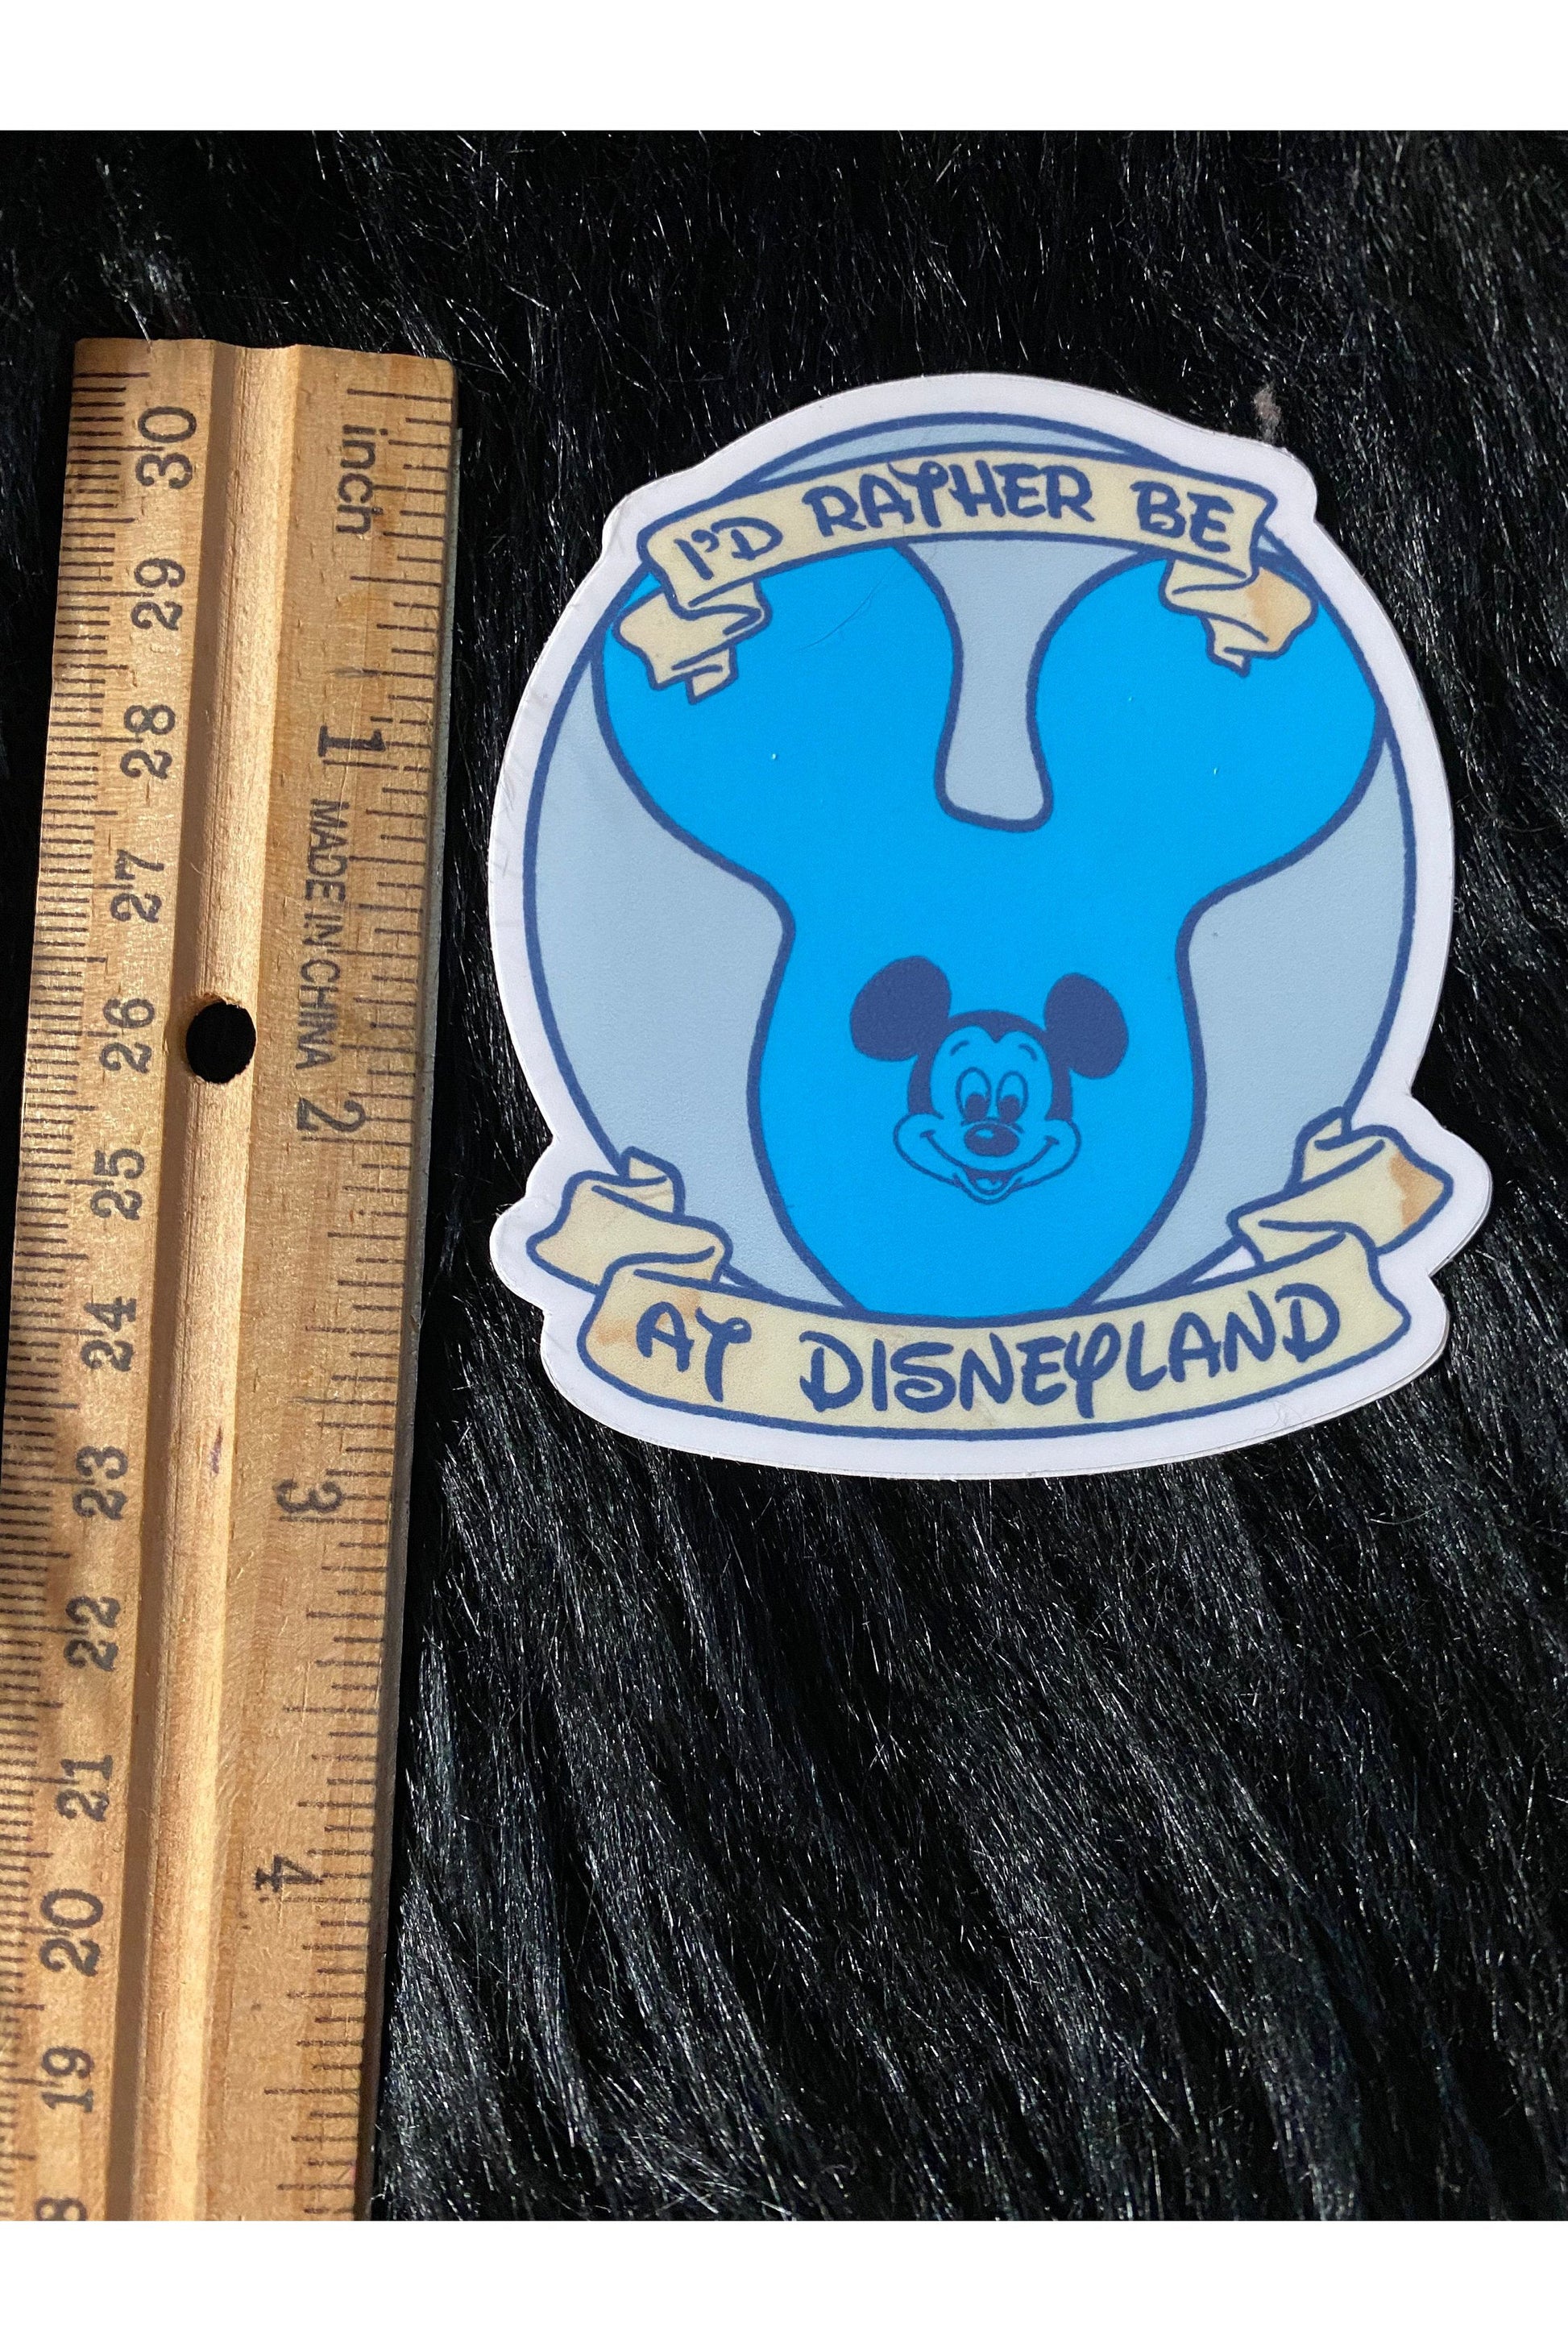 Happiest Balloon “I’d Rather Be at Disneyland” Vinyl Sticker Multiple Colors.